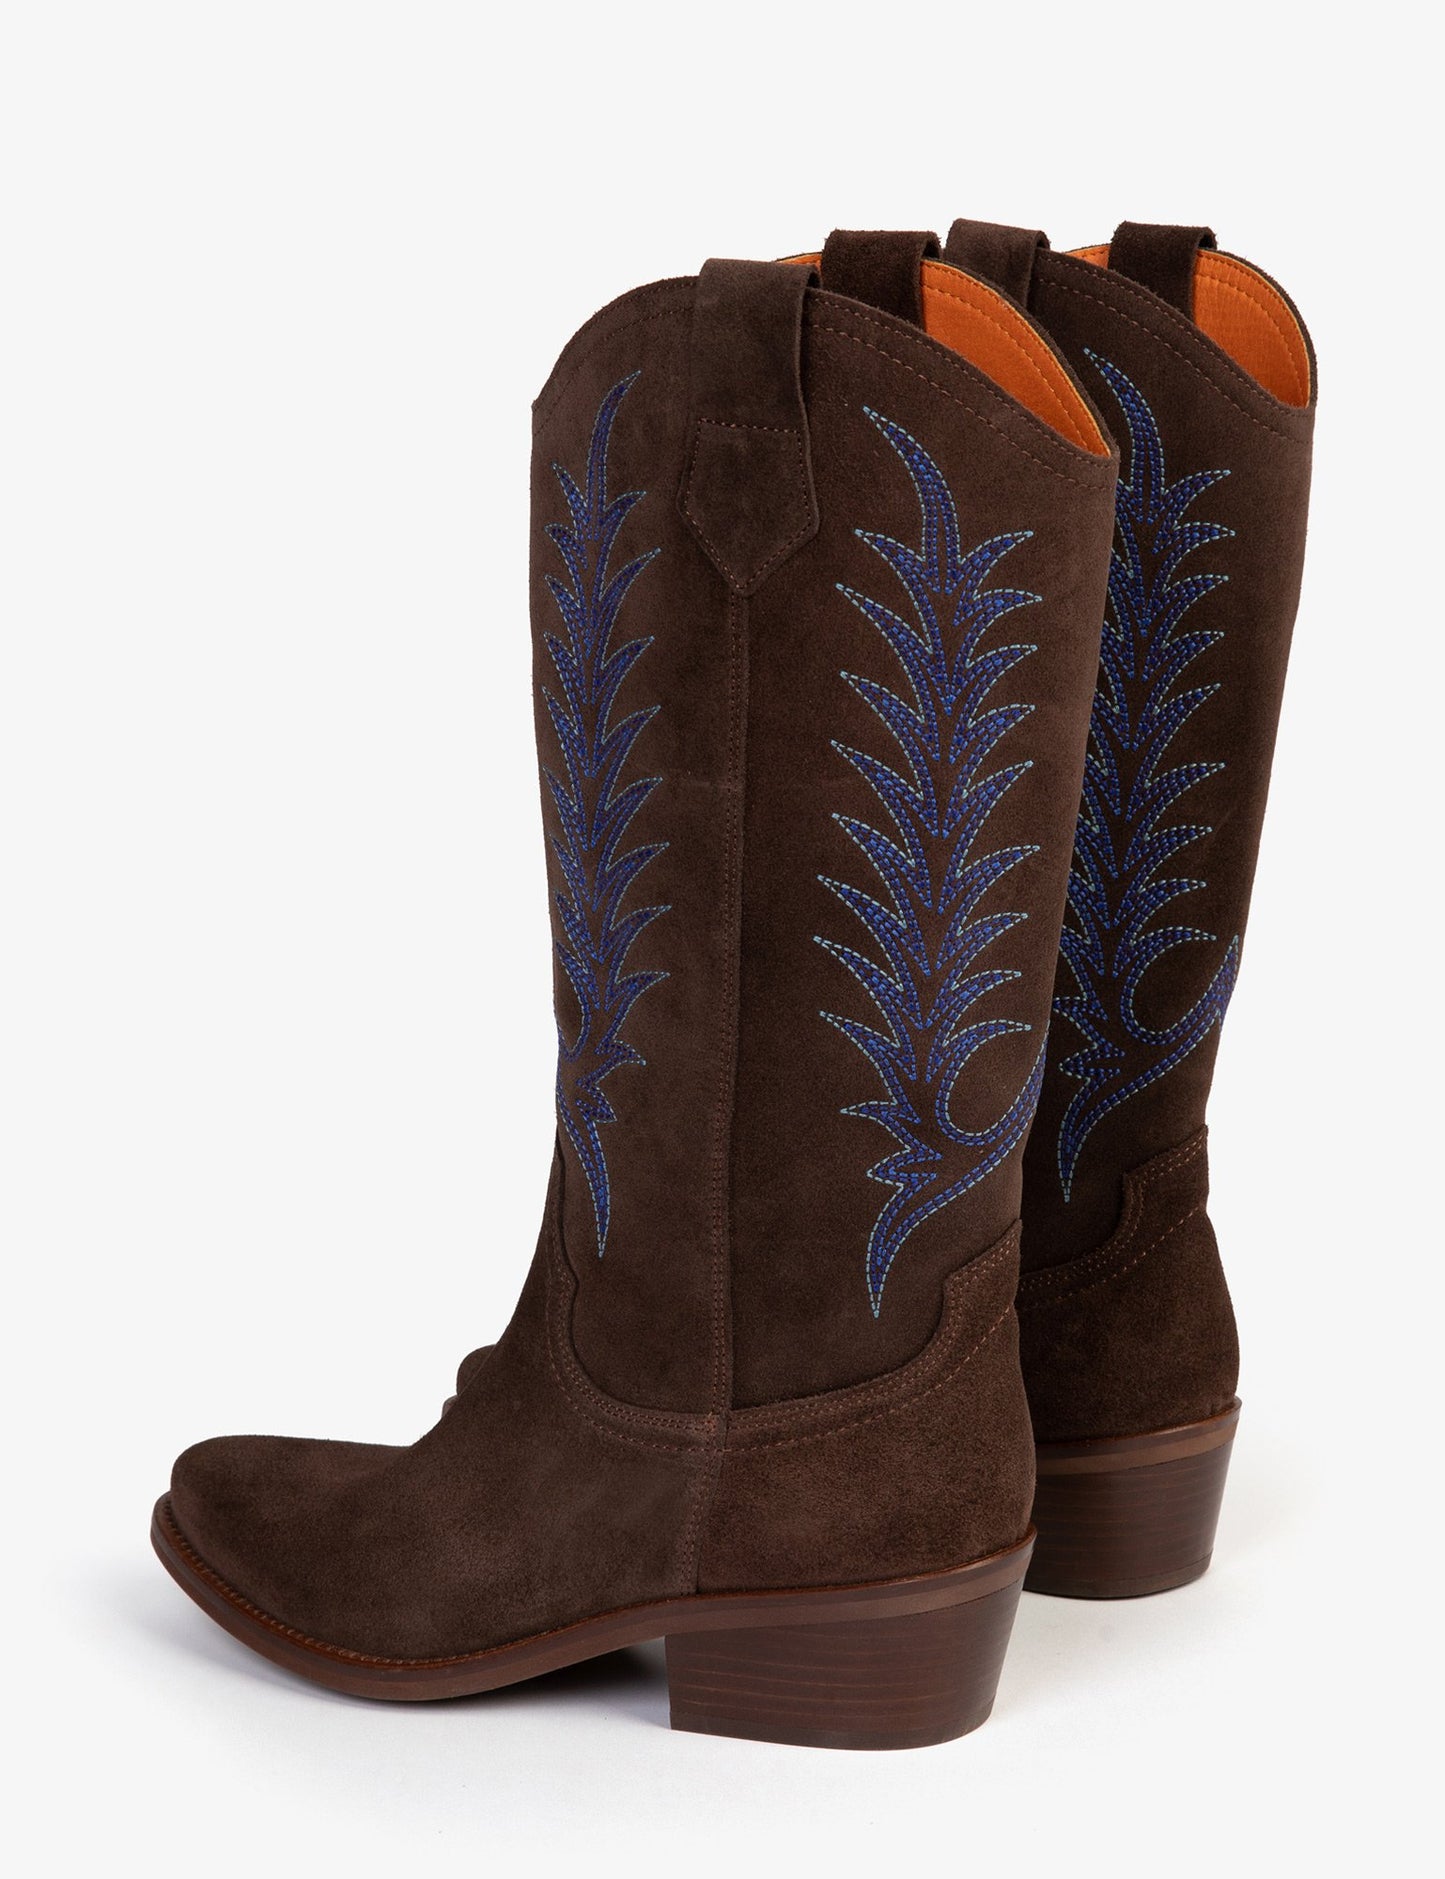 Goldie Embroidered Cowboy Boot - Bitter Chocolate